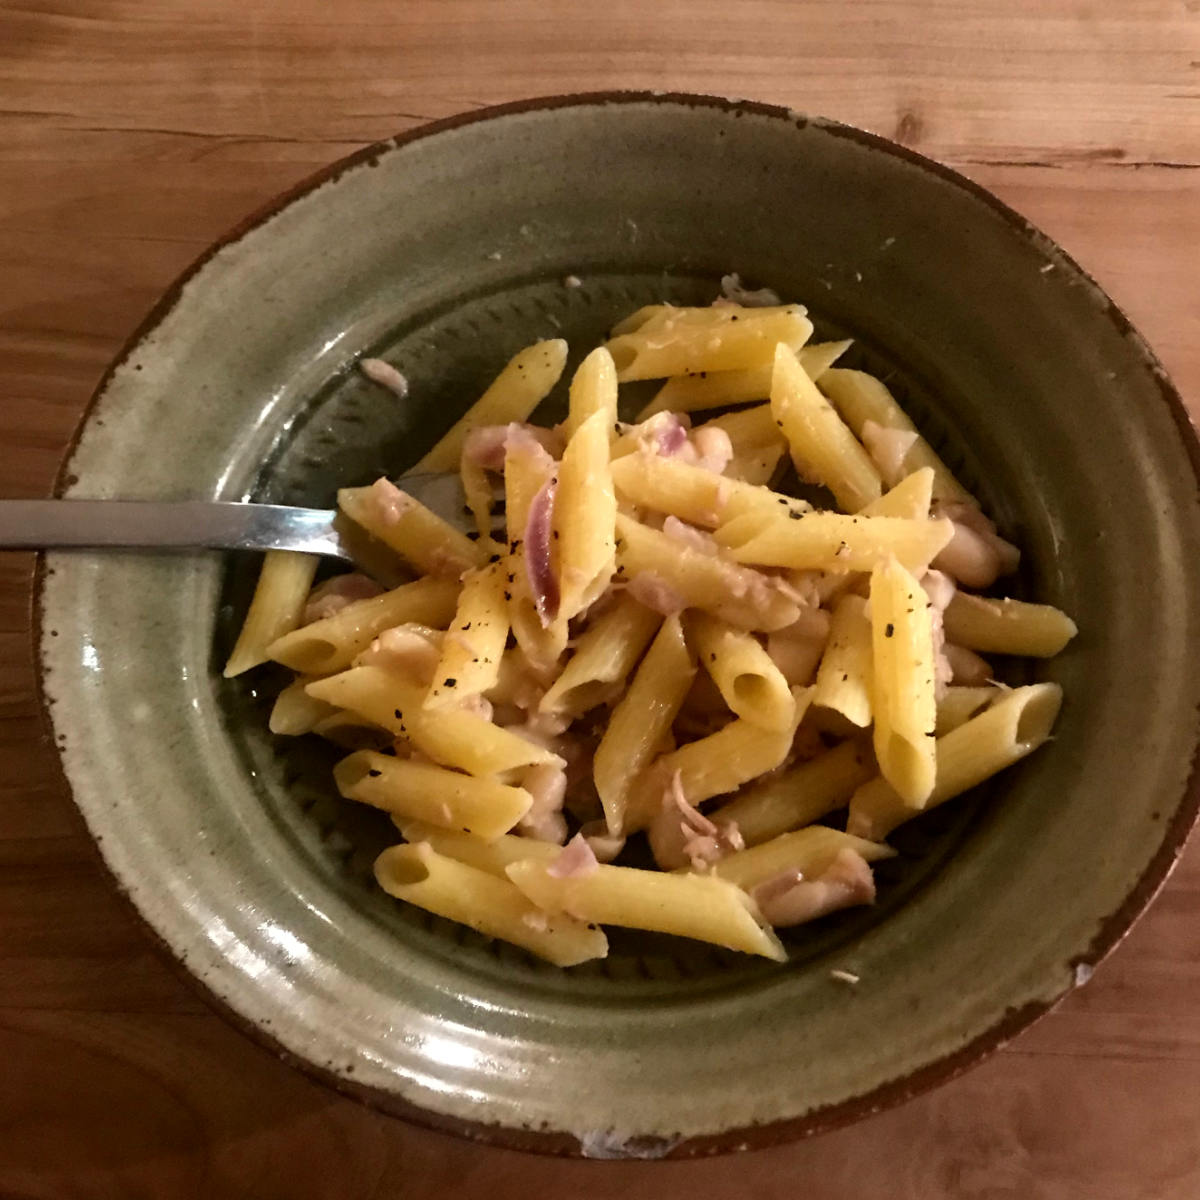 Bowl of Pasta with Tuna and Beans